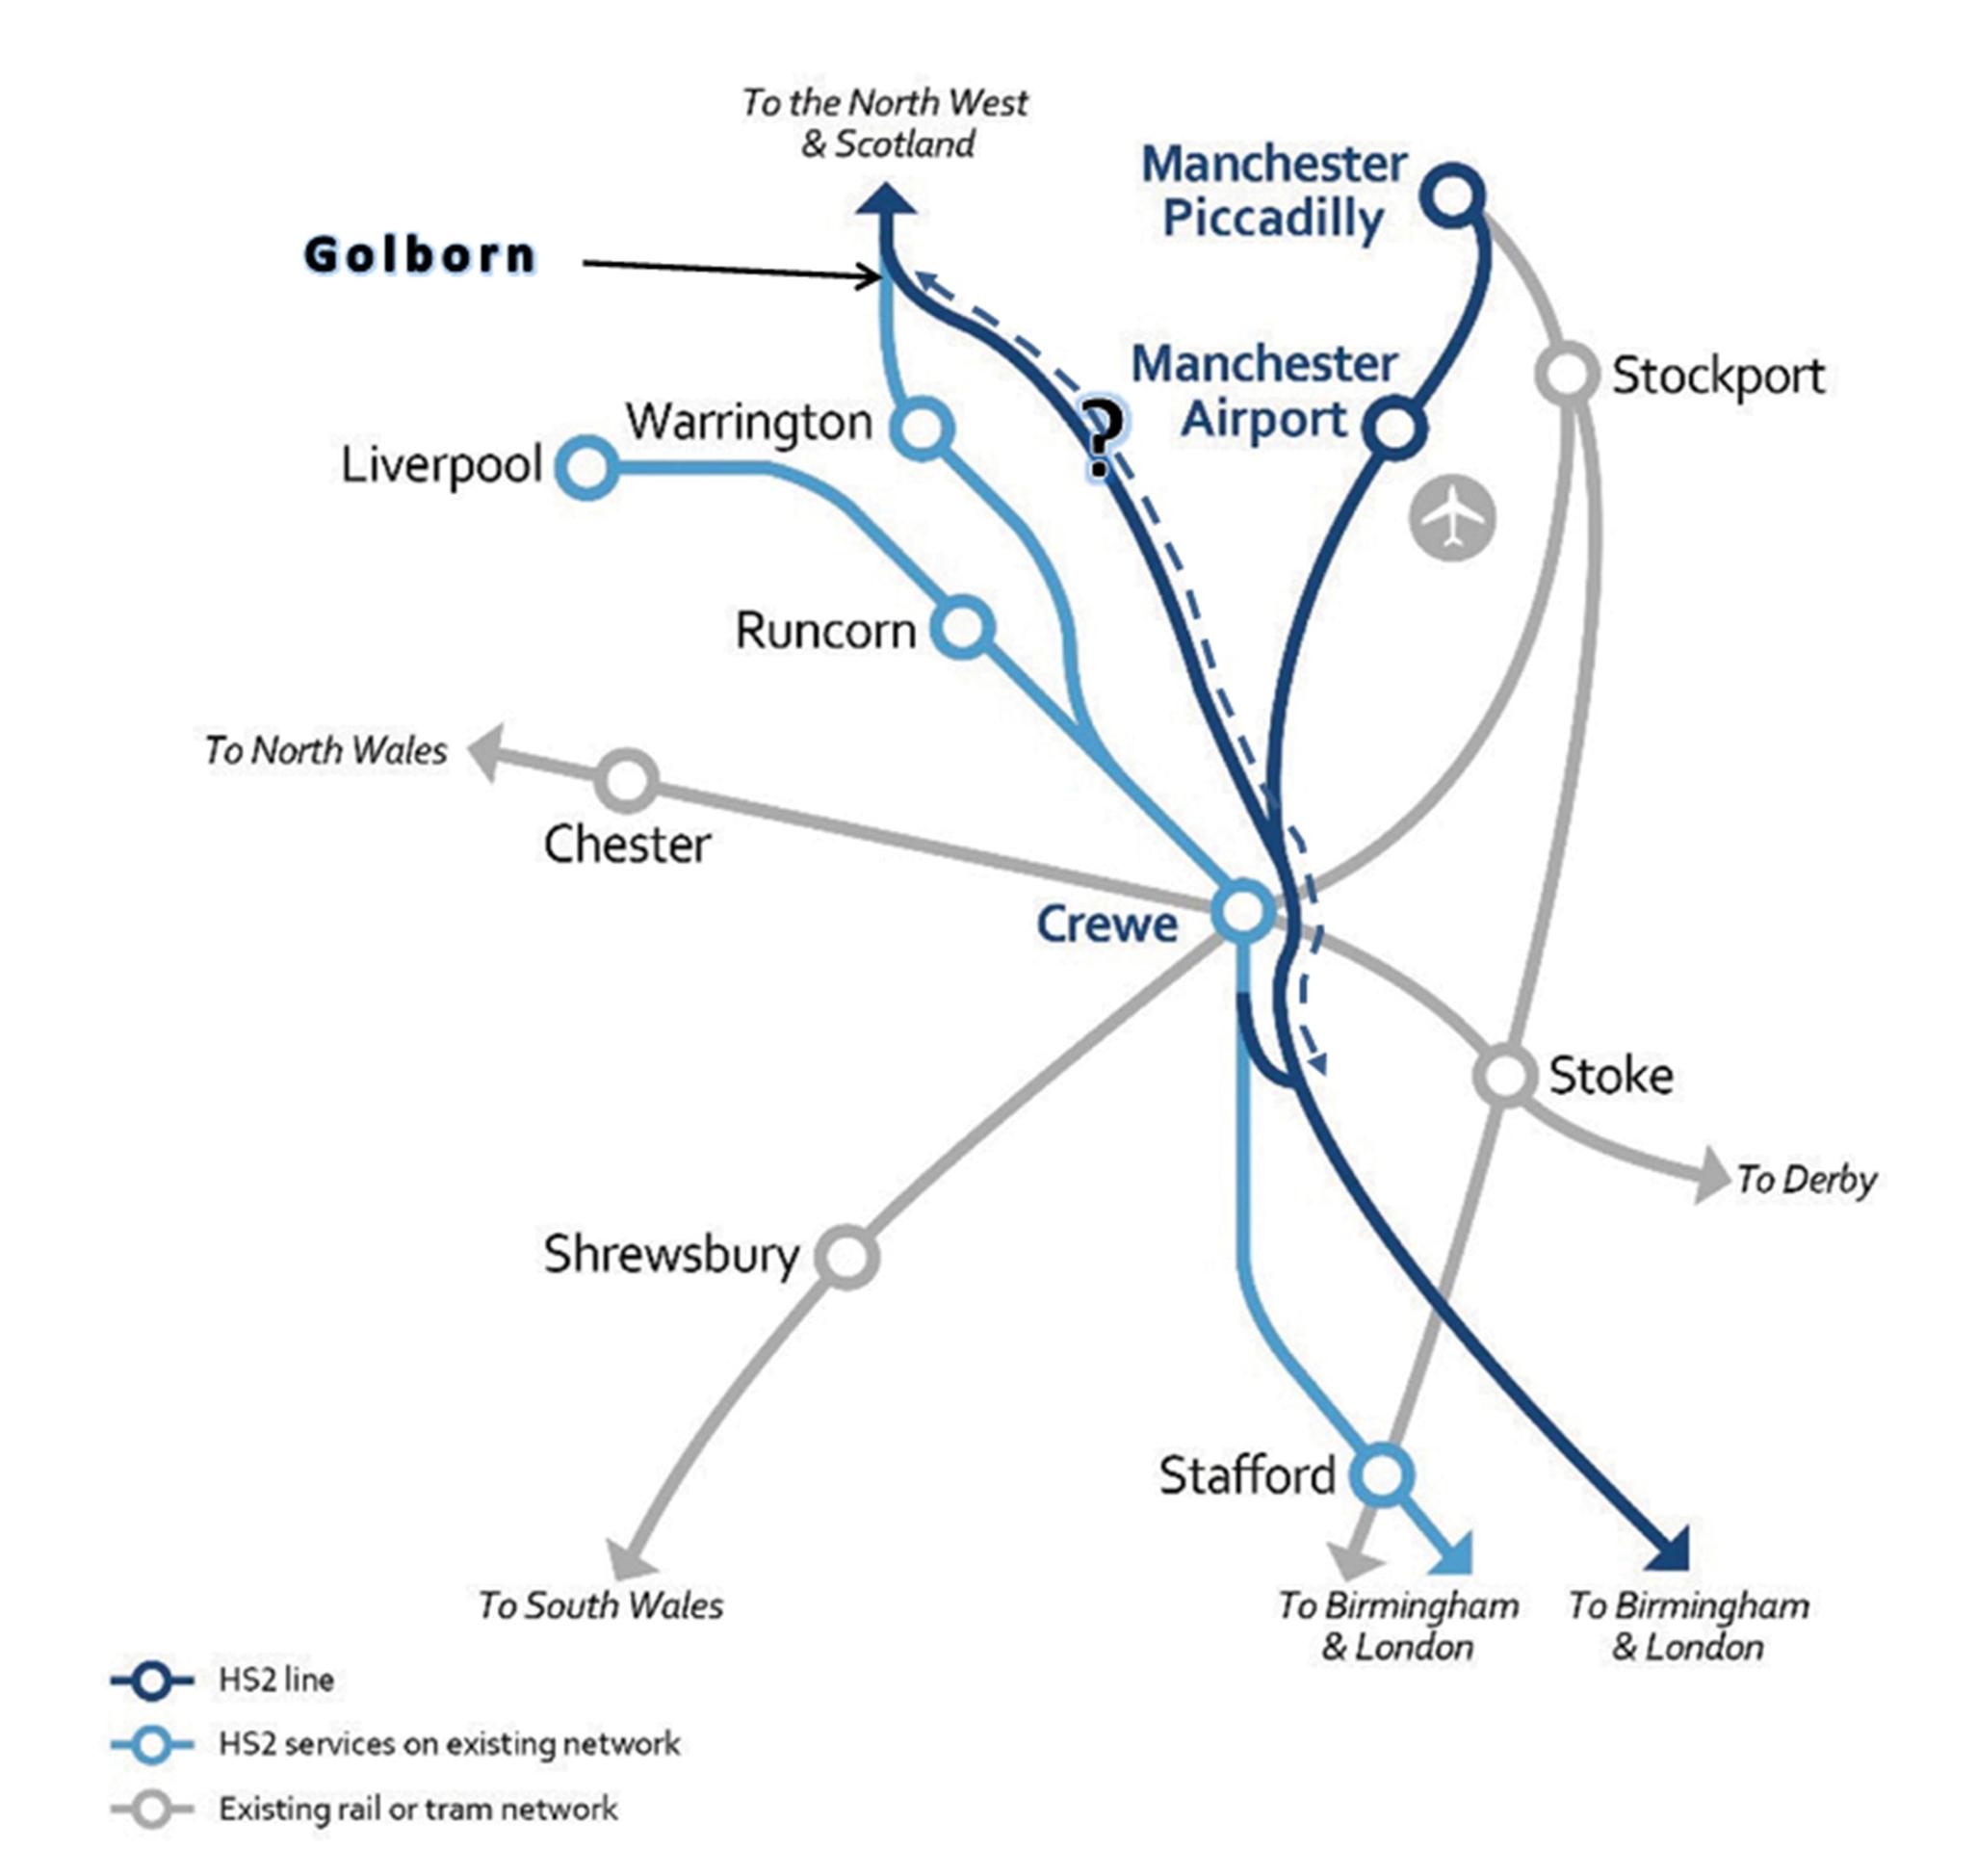 The HS2 bypass of Crewe and Warrington should be axed in favour of a high-speed line to Liverpool, says Gareth Davis